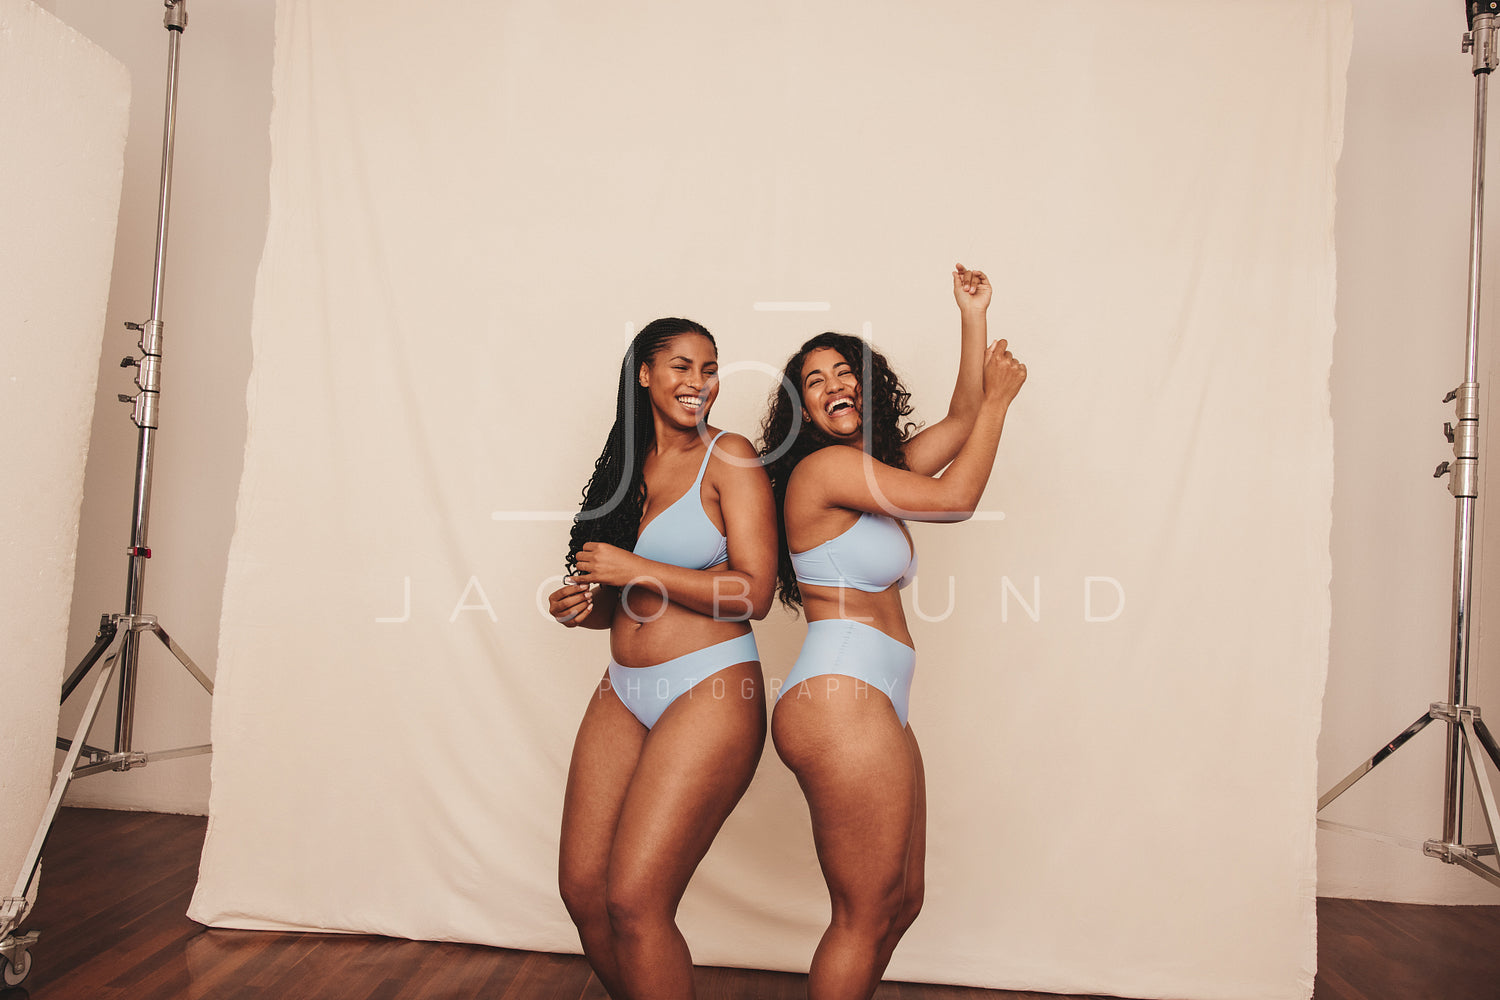 Cheerful young women dancing while wearing blue underwear